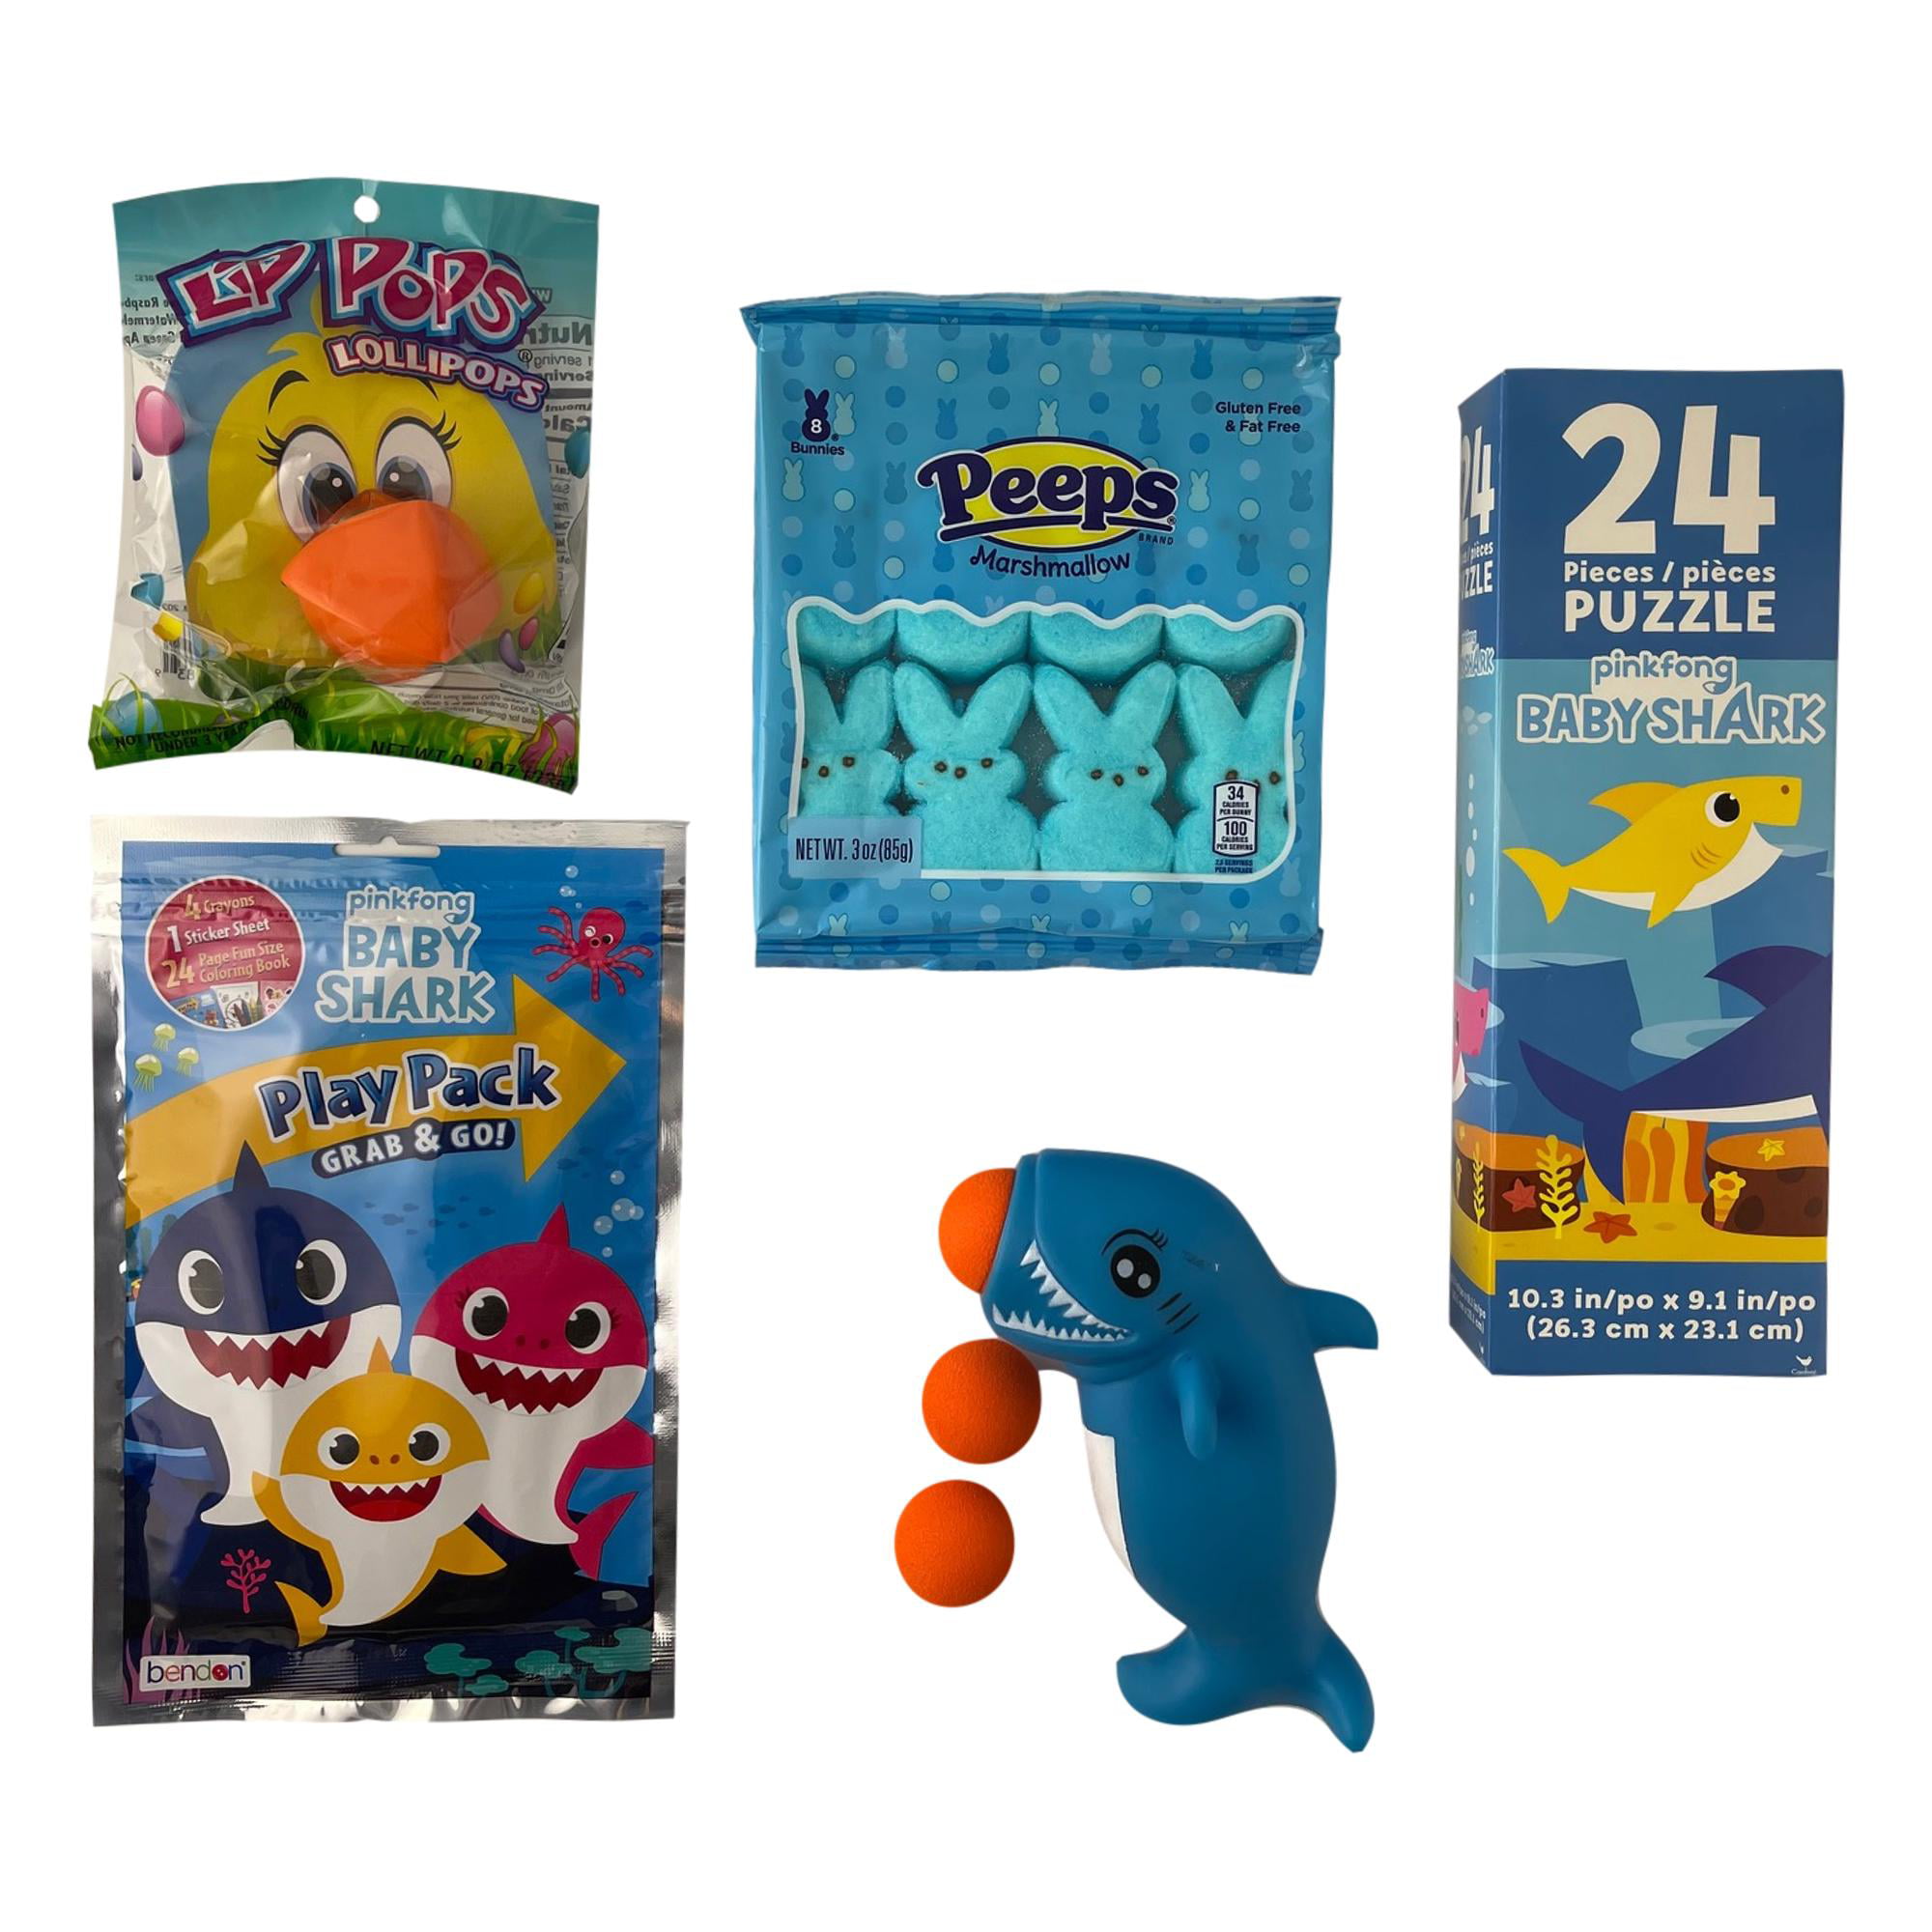 Baby Shark Easter Basket for Boys Prefilled and Premade with Peeps Candy, Puzzle, and Toys (Shark Popper) - Walmart.com